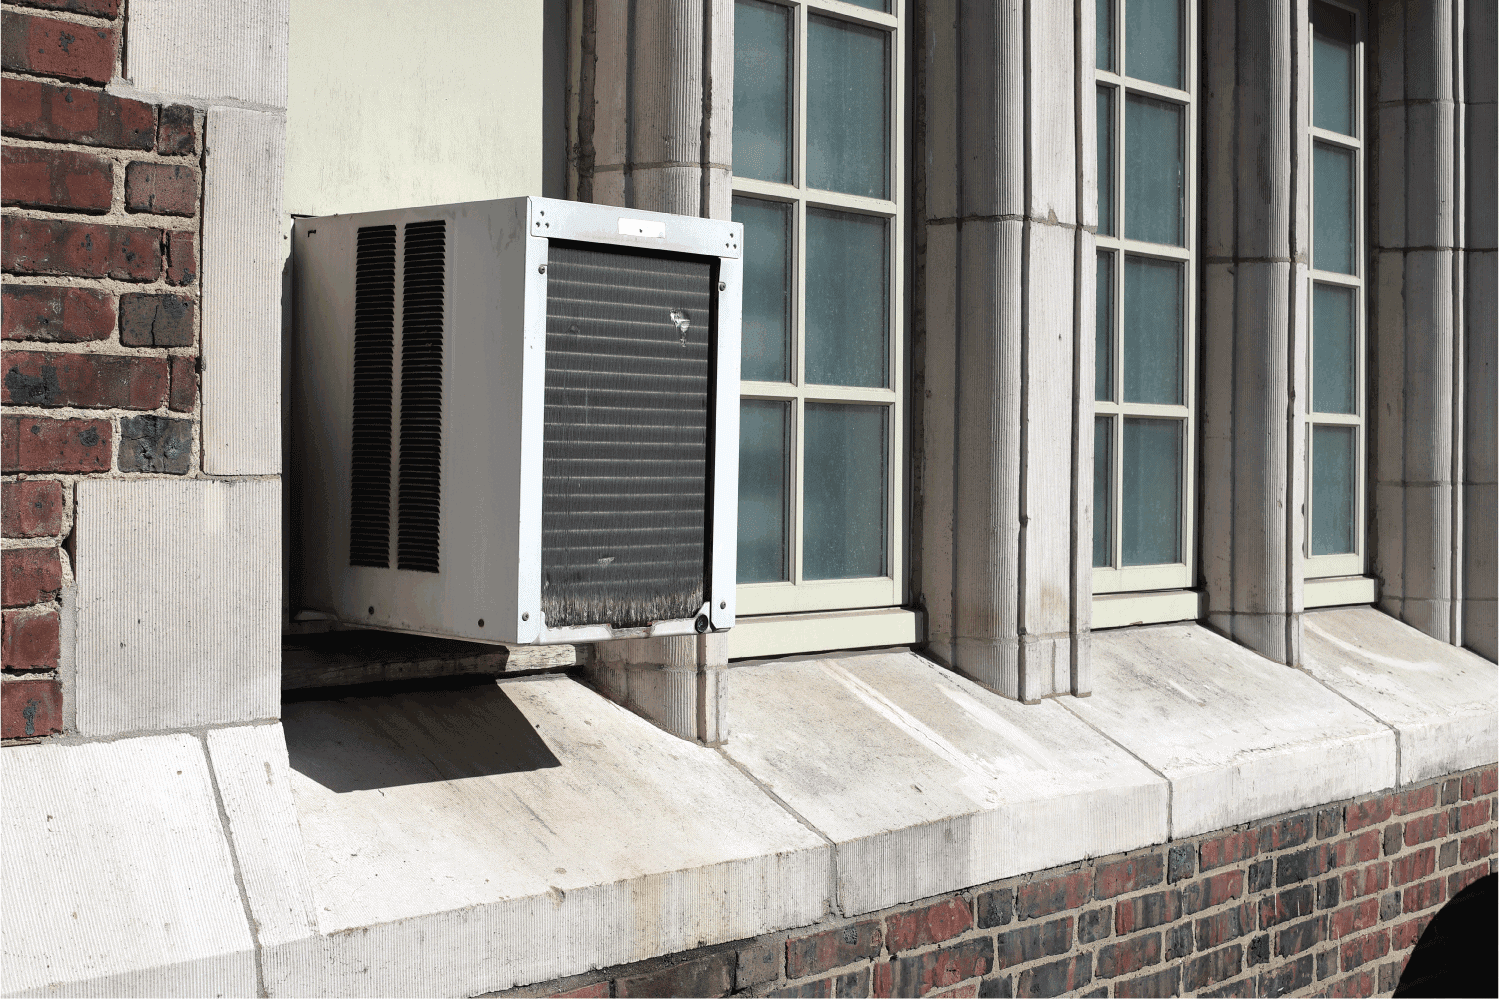 Window Air Conditioner unit on old brick building